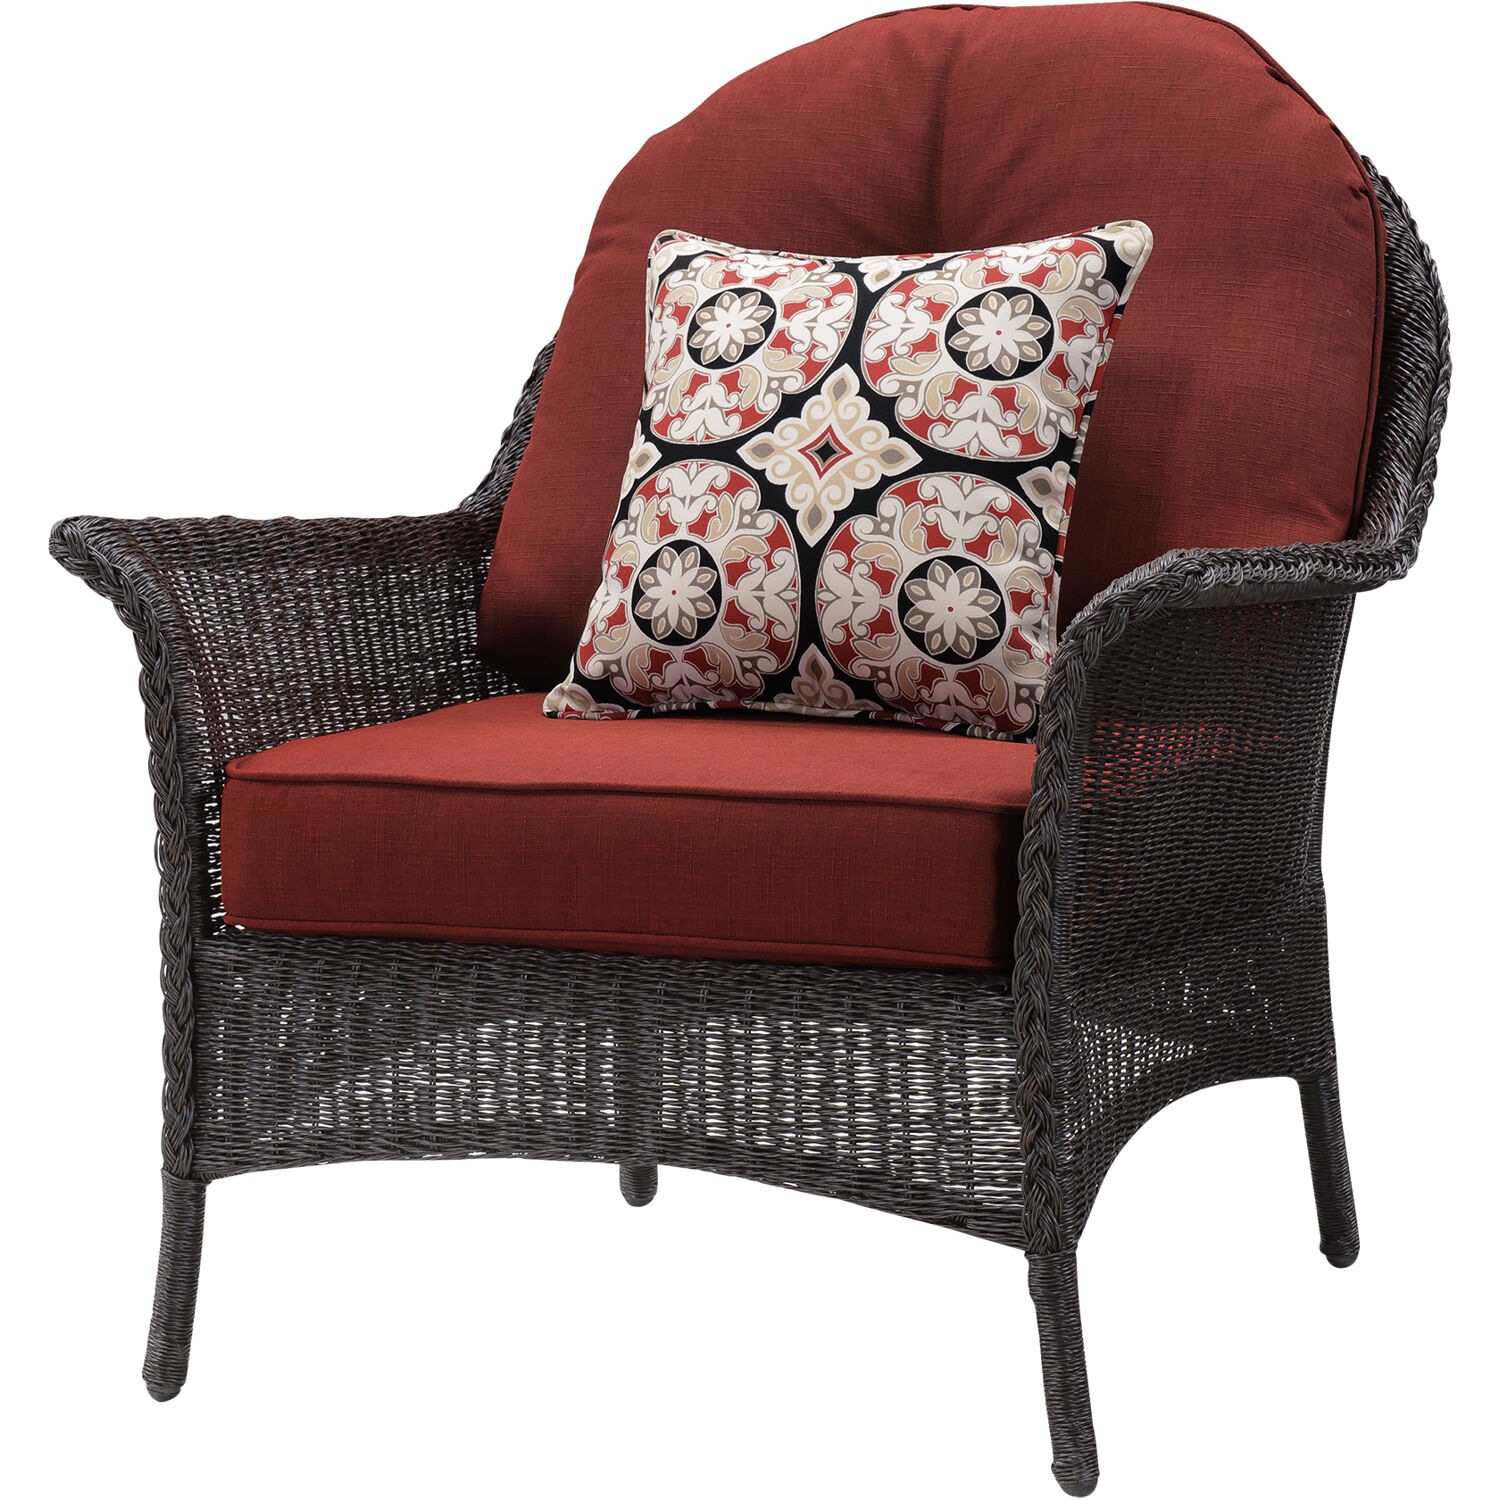 Hanover Sun Porch 6-Pc. Resin Lounge Set w/ Handwoven Loveseat, 2 Armchairs, 2 Ottomans, Coffee Table and Plush Crimson Red Cushions - image 4 of 12